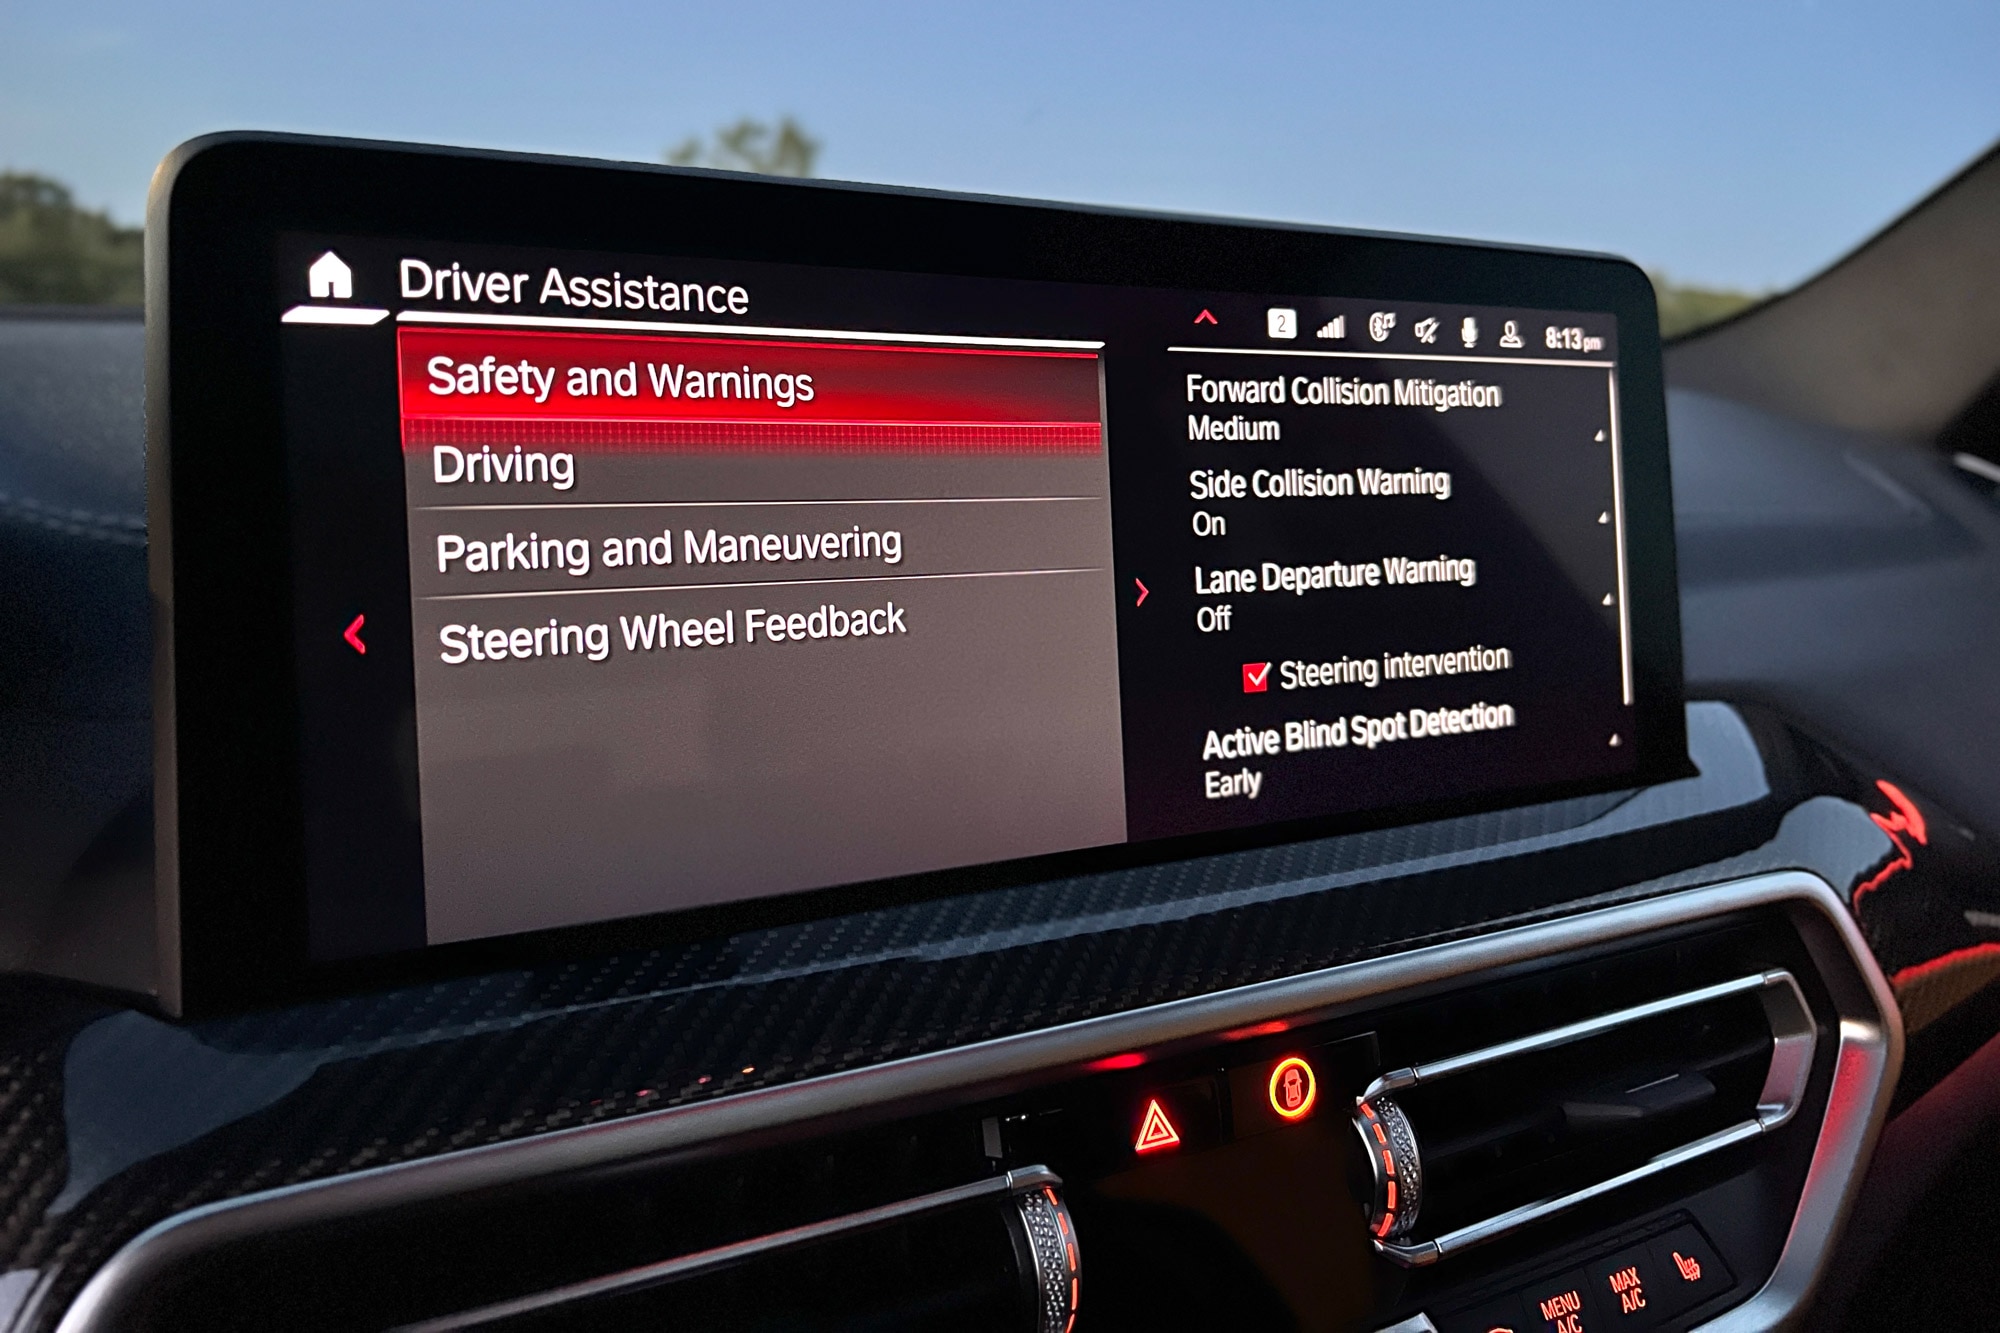 2023 BMW X3 M infotainment screen showing driver assistance safety features